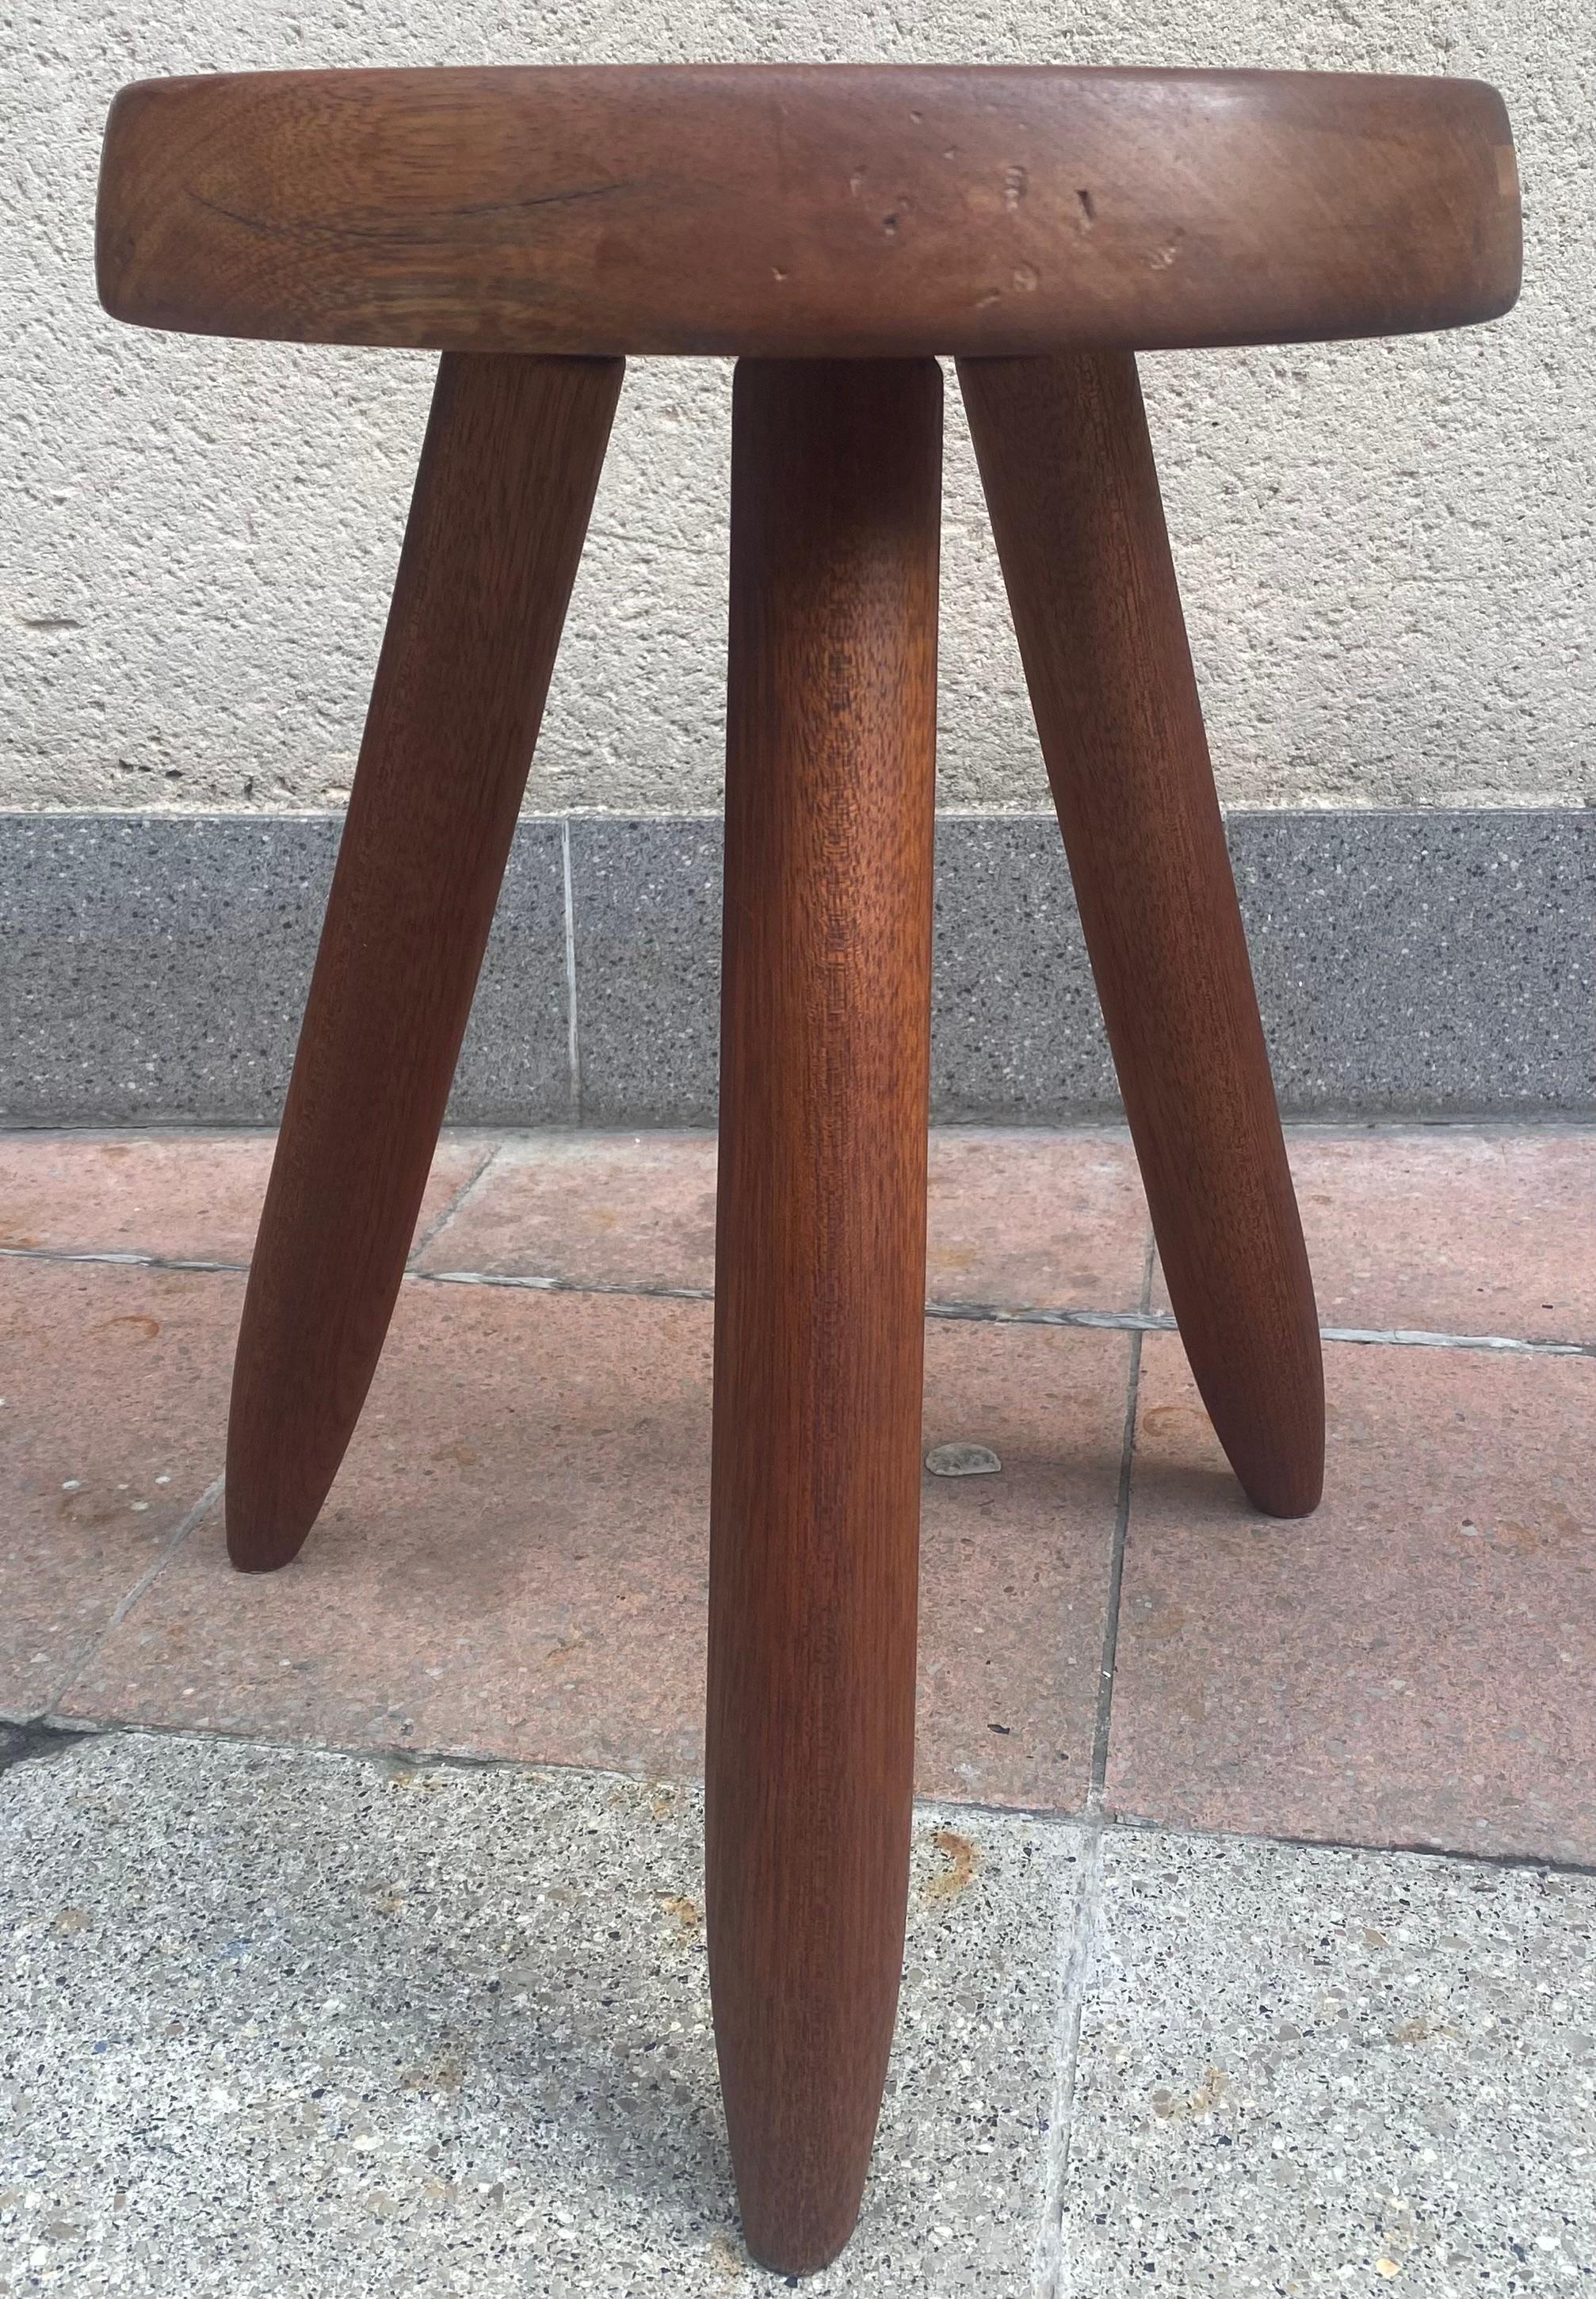 High shepherd stool by Charlotte Perriand - circa 1960.
For Les Arcs 1600
Editor Steph Simon
Mahogany
Dimensions: h45xø31cm
Very nice patina.
1960s. 
note a trace on the seat (see photos)
In general good shape.

